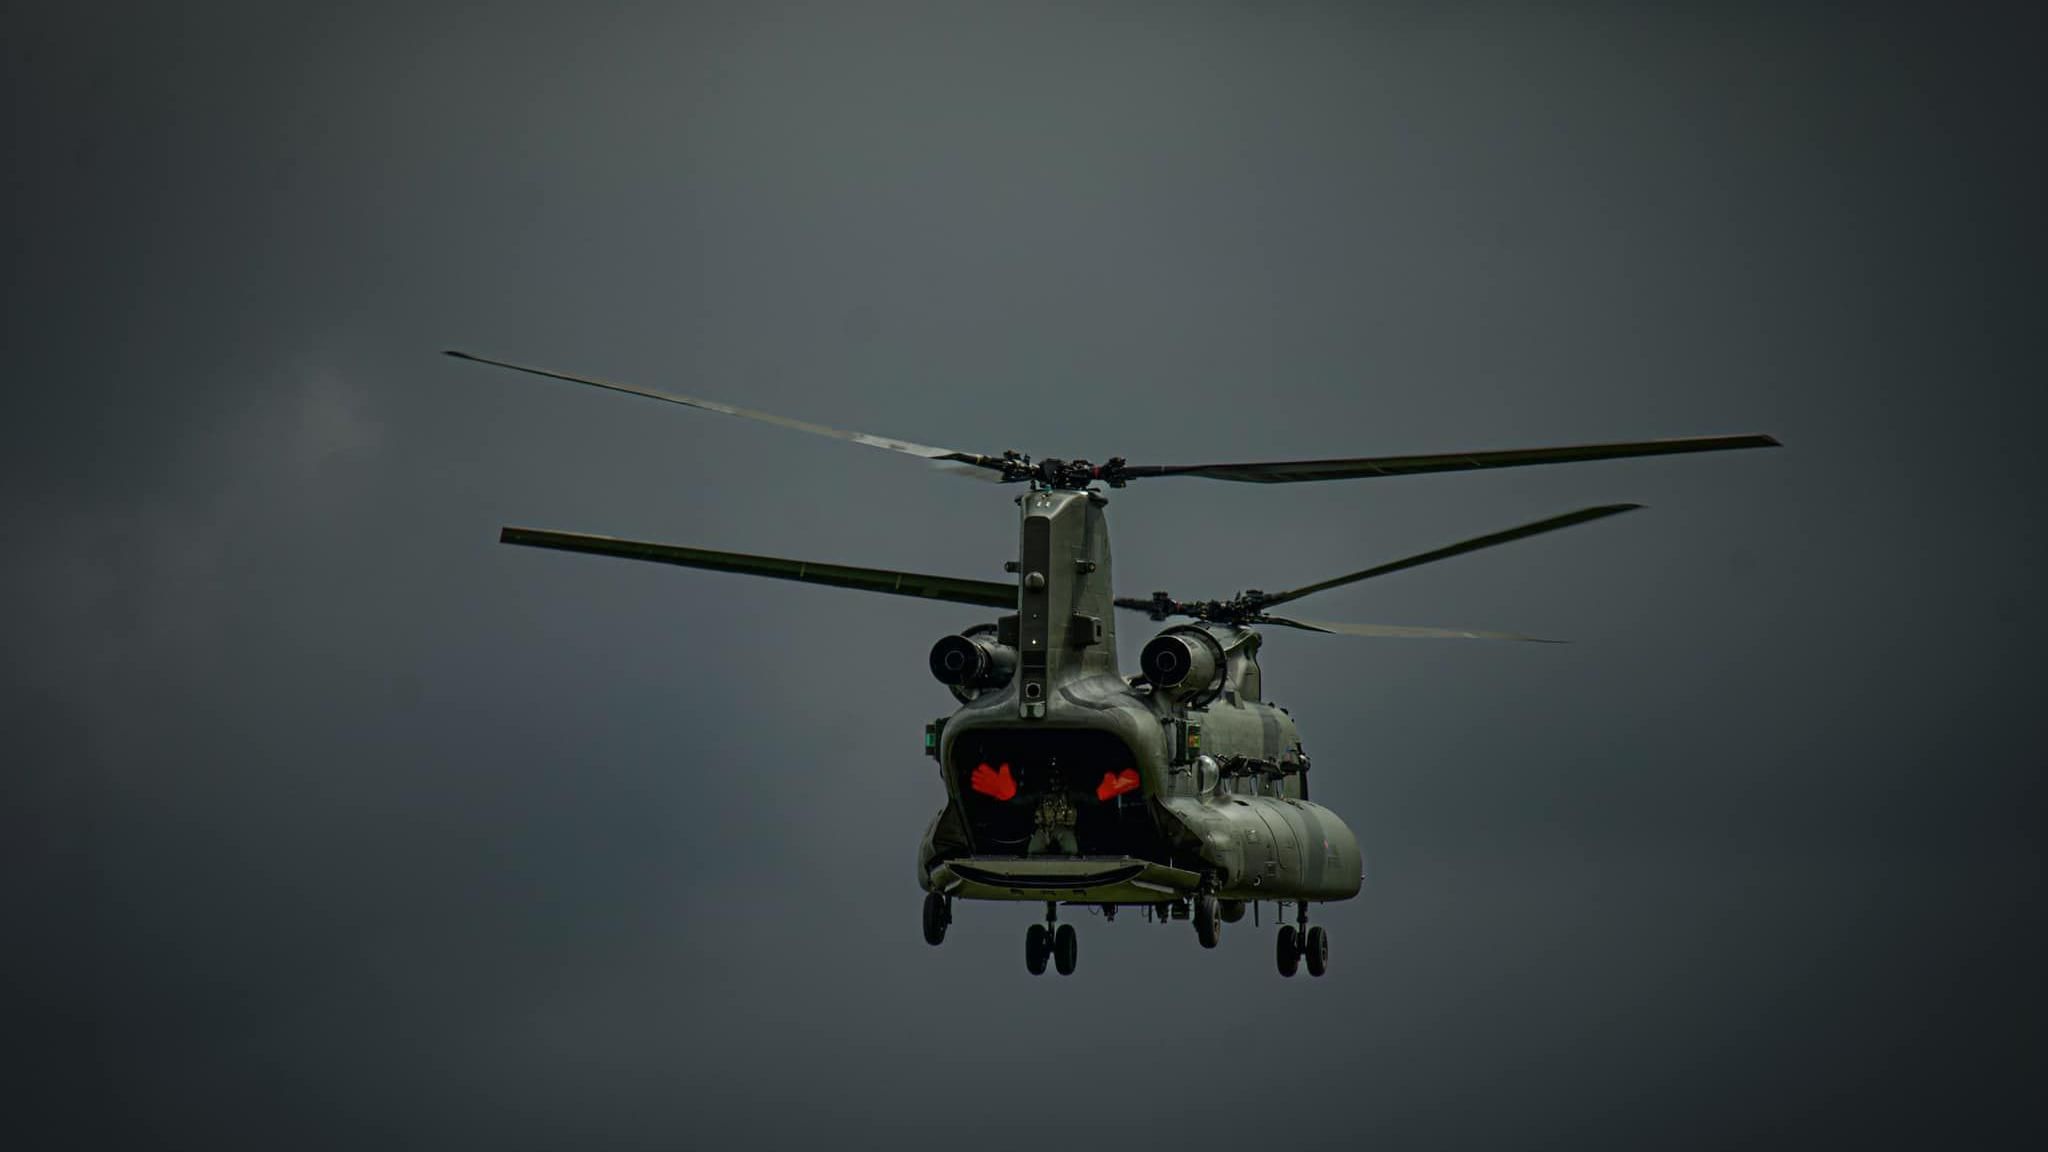 A helicopter hovering in the grey sky